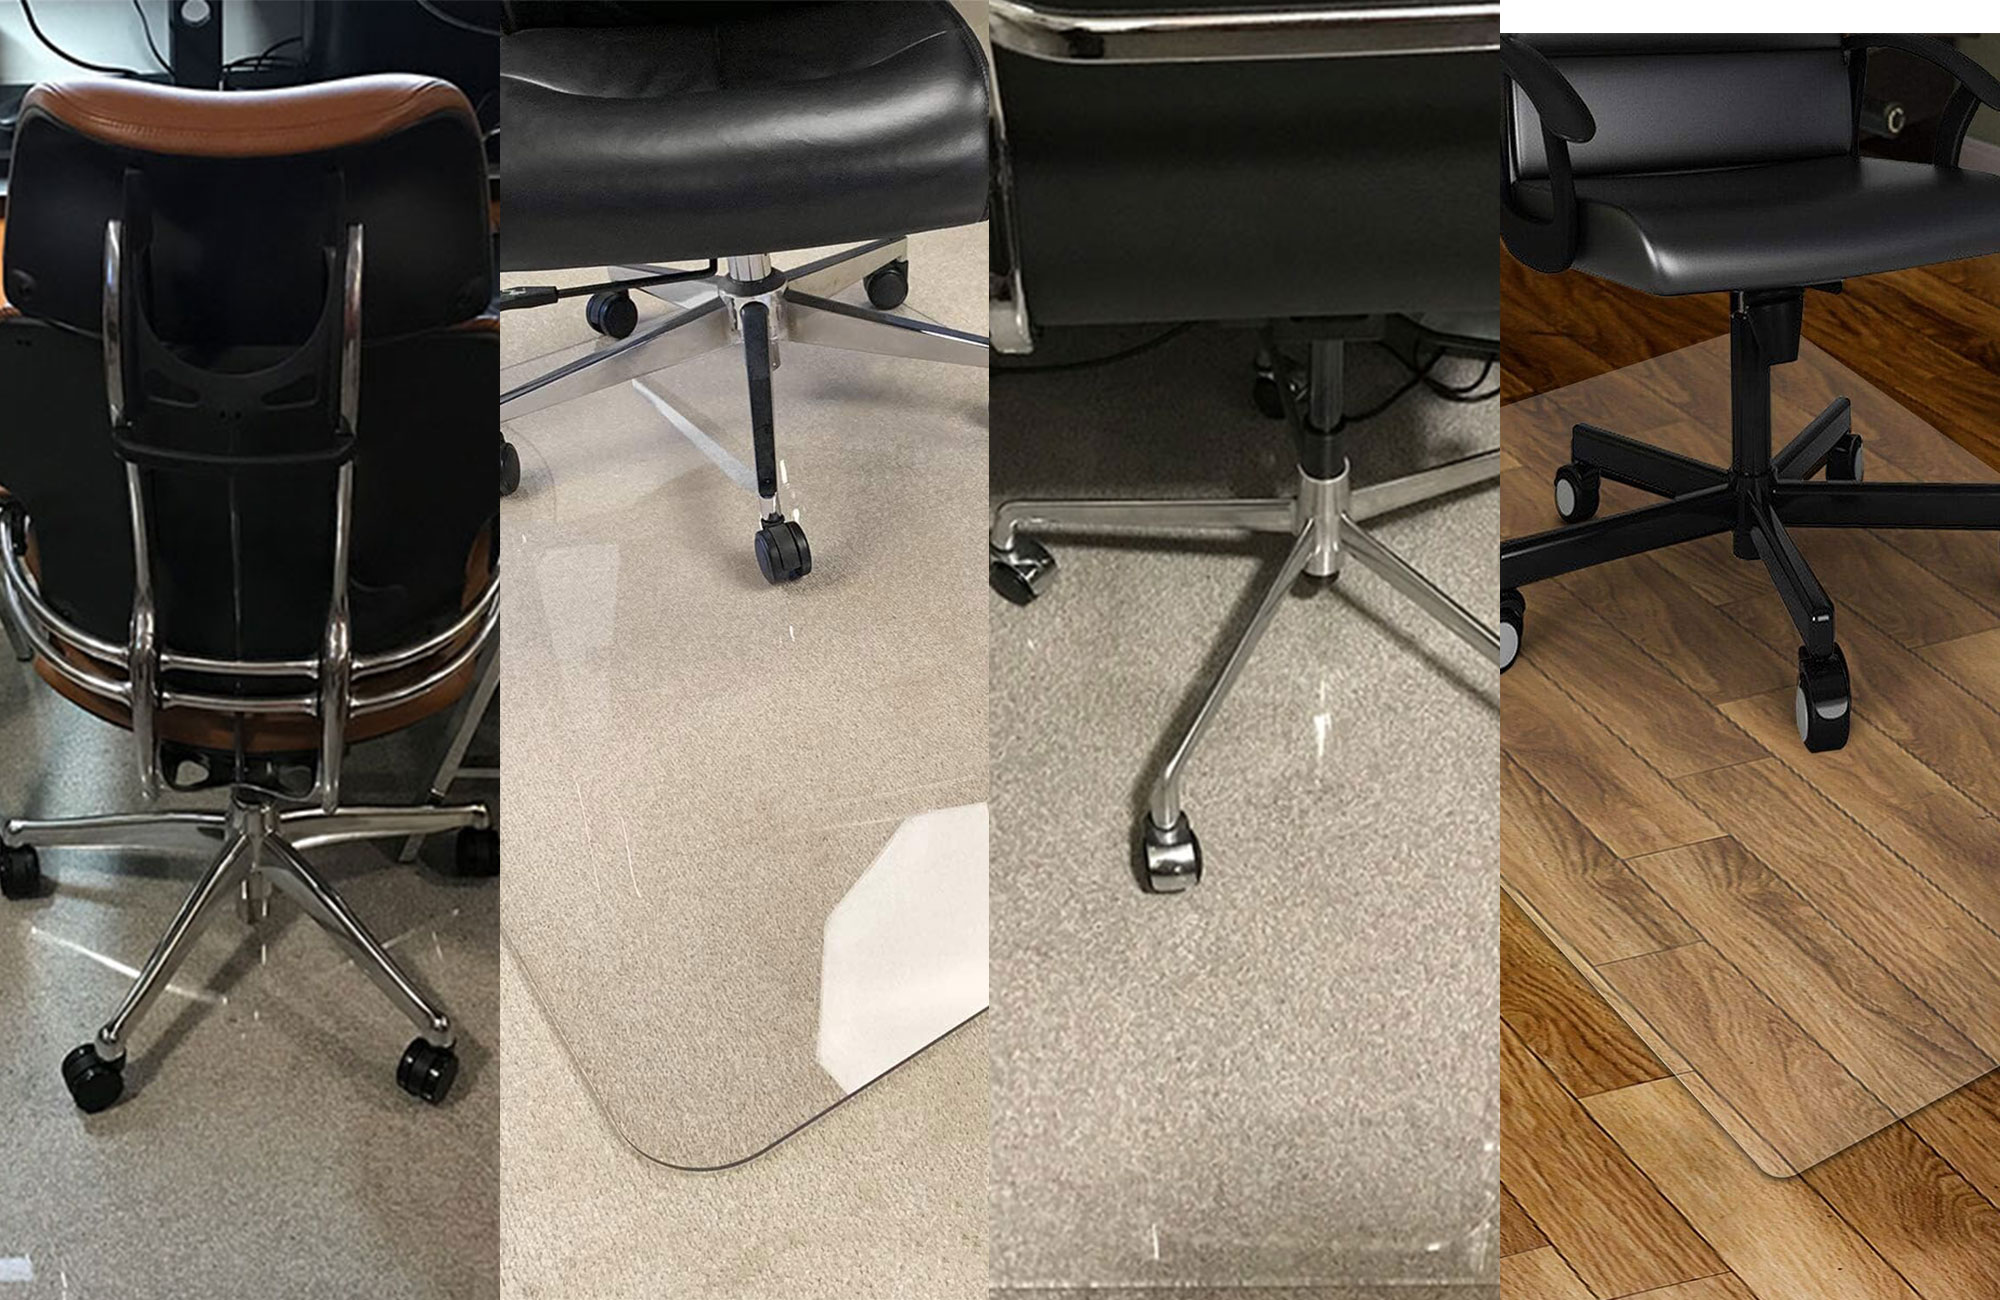 A lineup of the best chair mats in a lineup of four vertical panels.